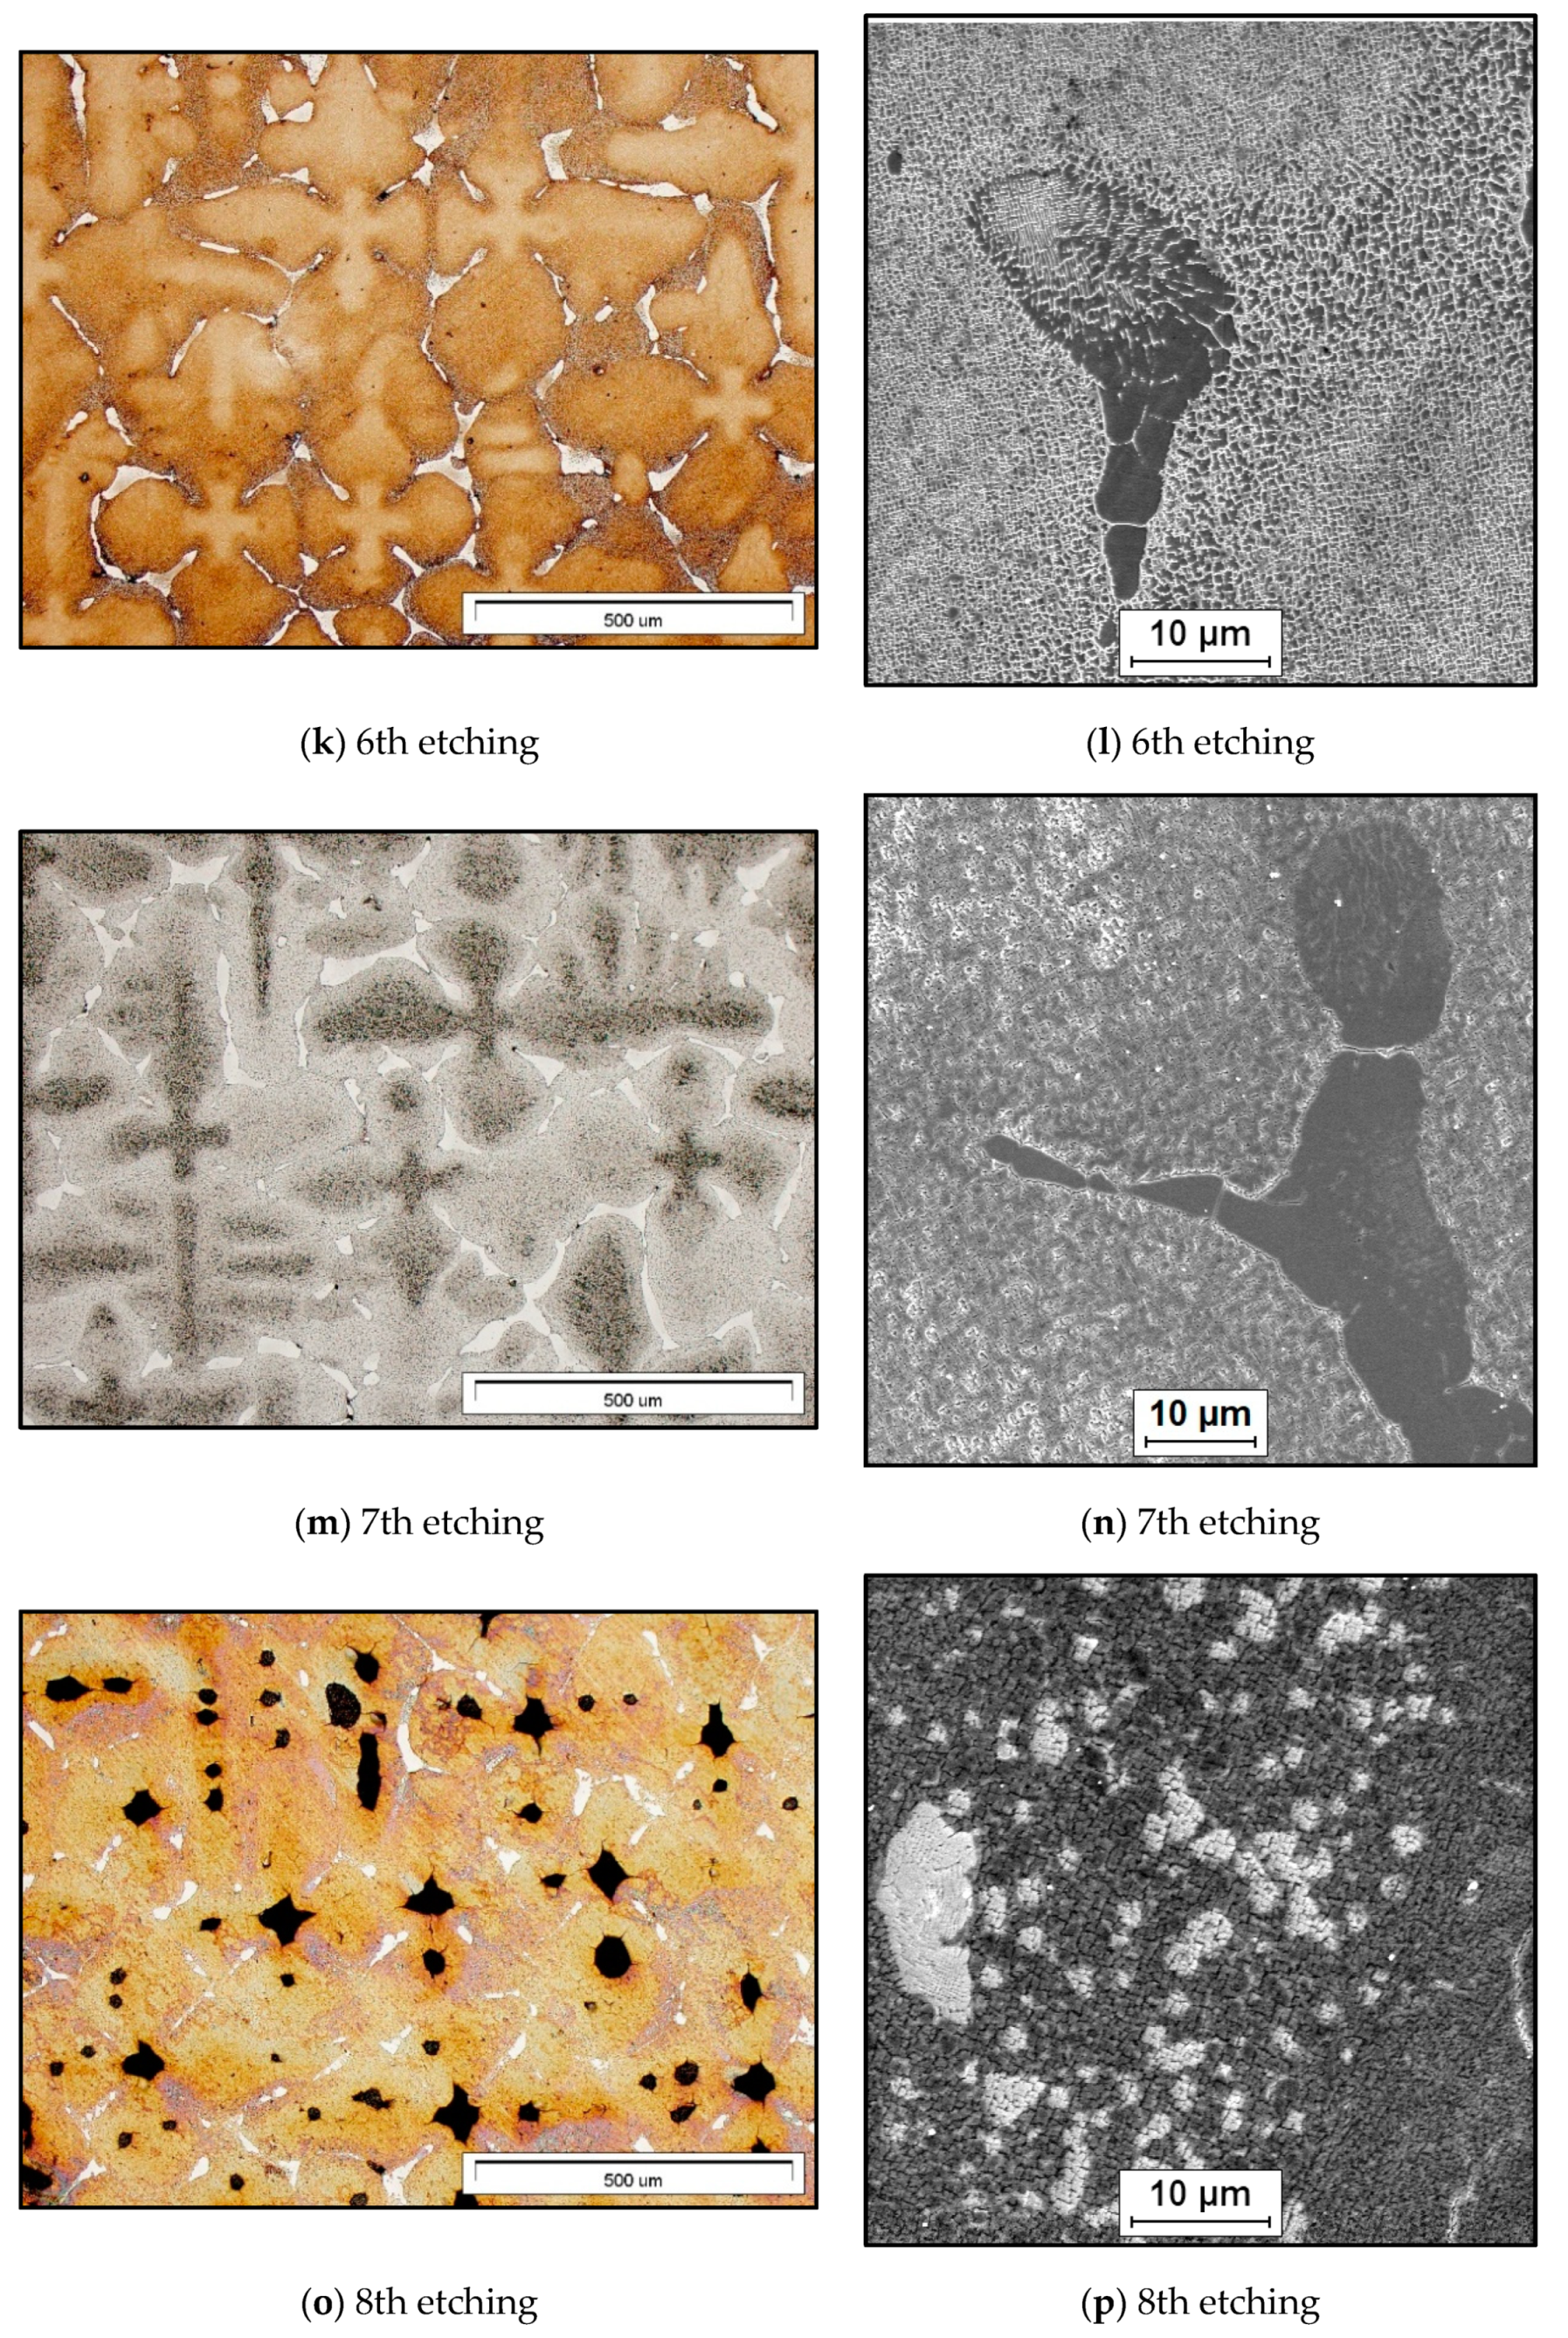 Materials Free Full Text Methodology For Revealing The Phases And Microstructural Constituents Of The Cmsx 4 Nickel Based Superalloy Implicating Their Computer Aided Detection For Image Analysis Html